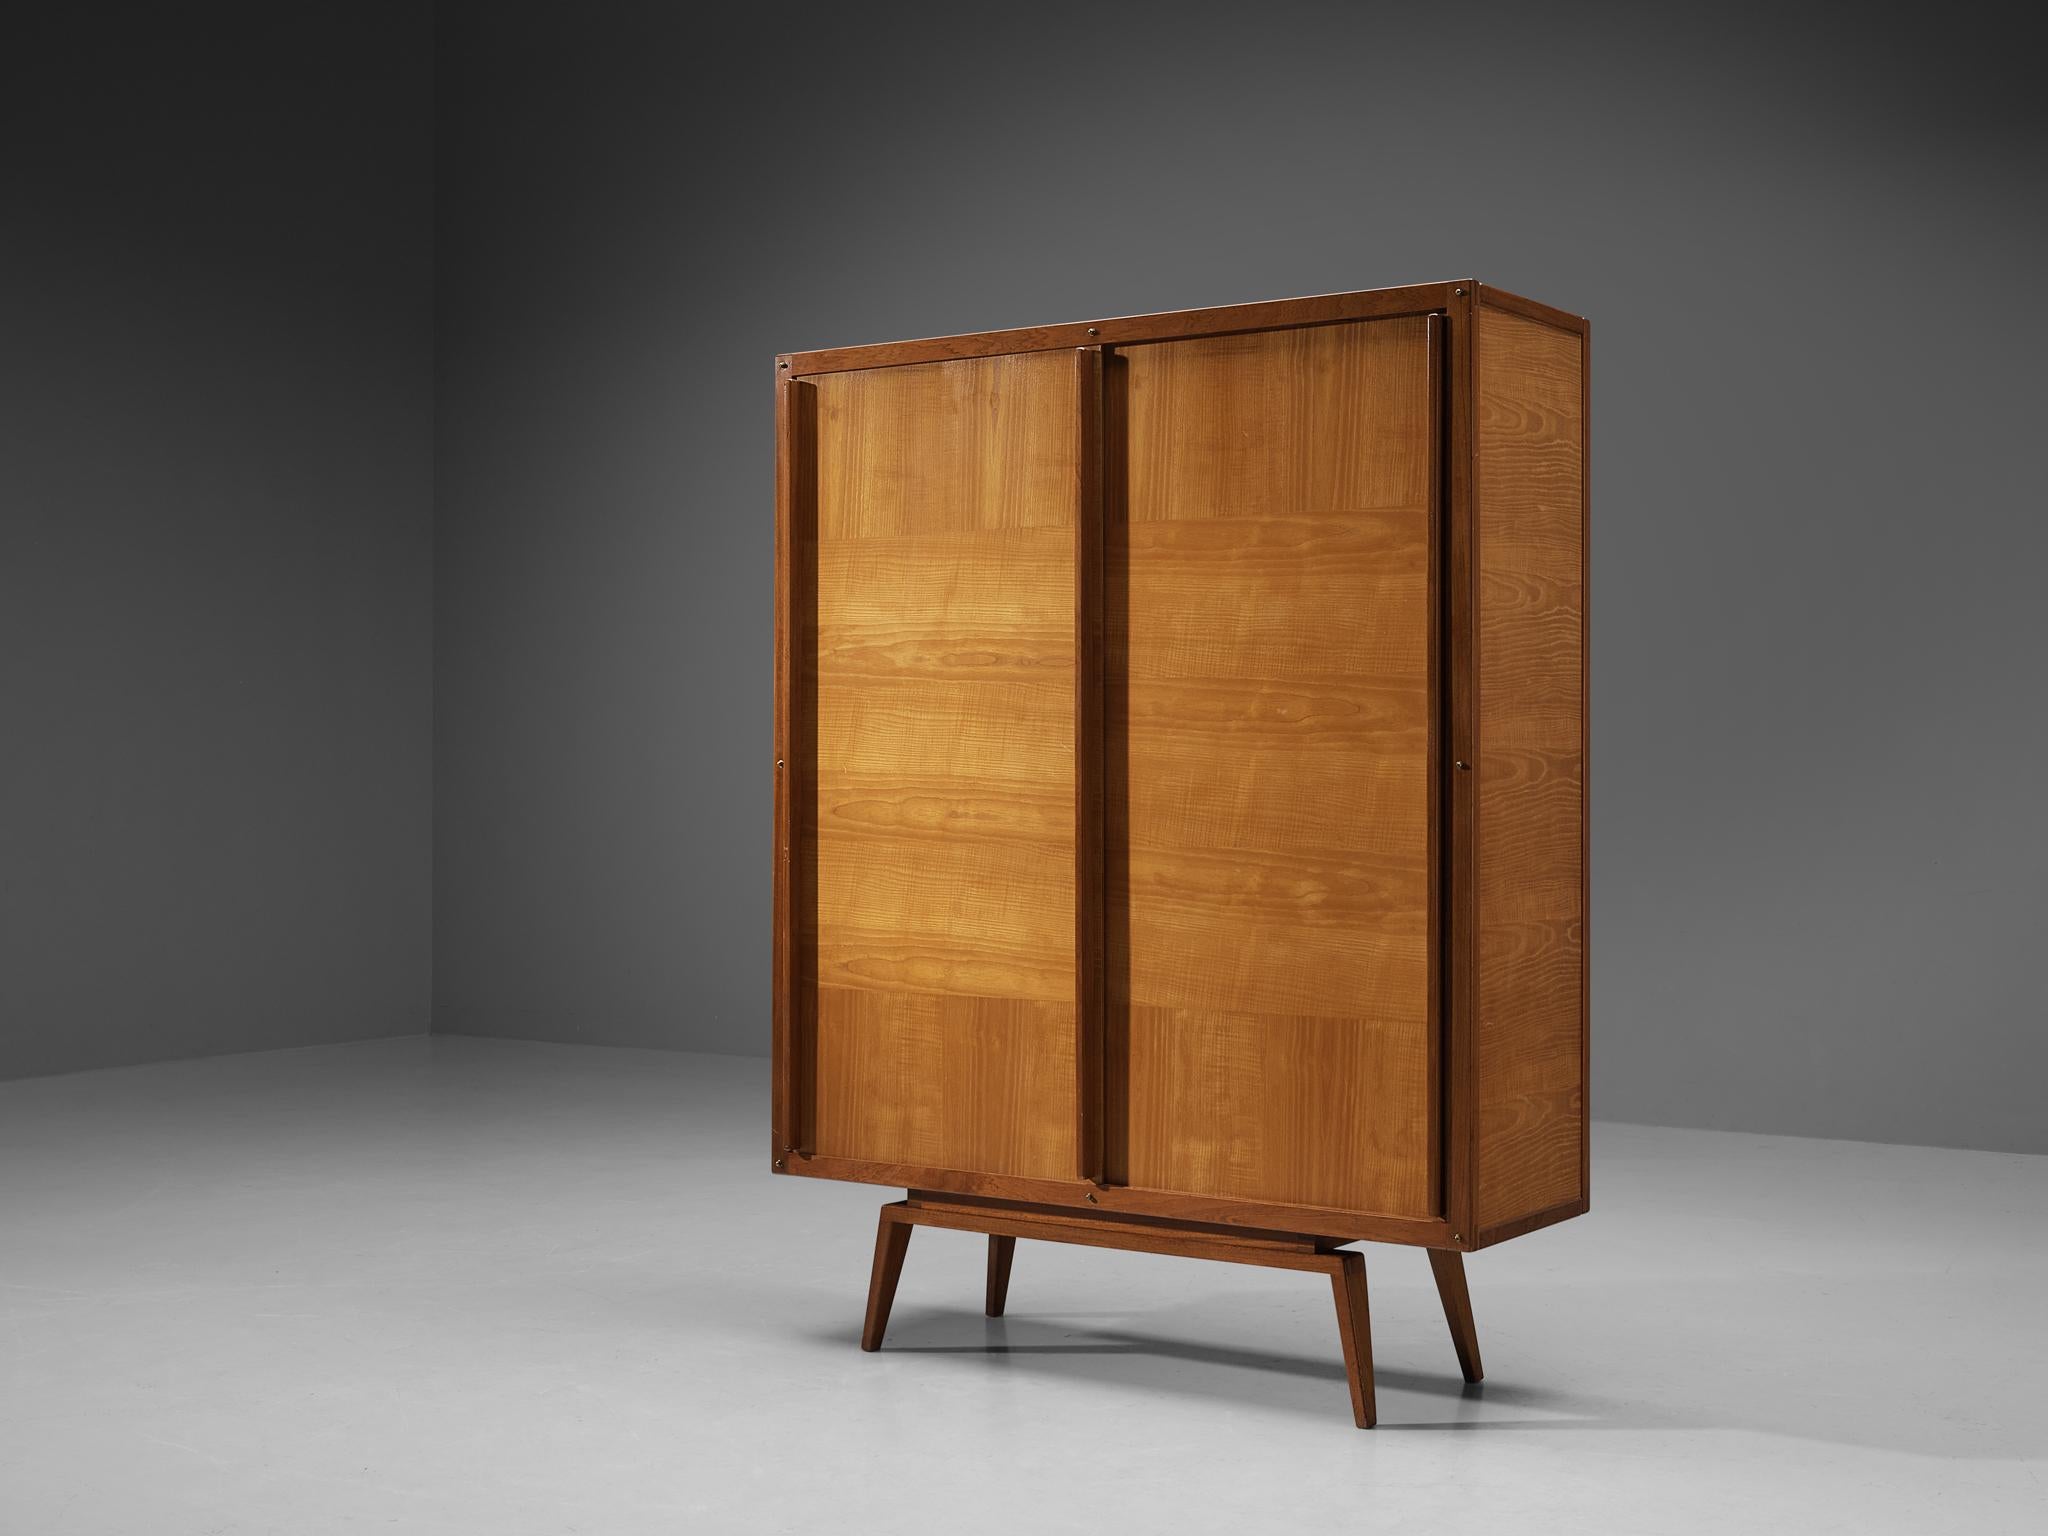 André Sornay for Atelier Sornay, wardrobe or armoire, ash, mahogany, France, 1950s 

Iconic midcentury wardrobe by French designer André Sornay. With its geometric design and the combination of mahogany and ash the appearance awakes the association